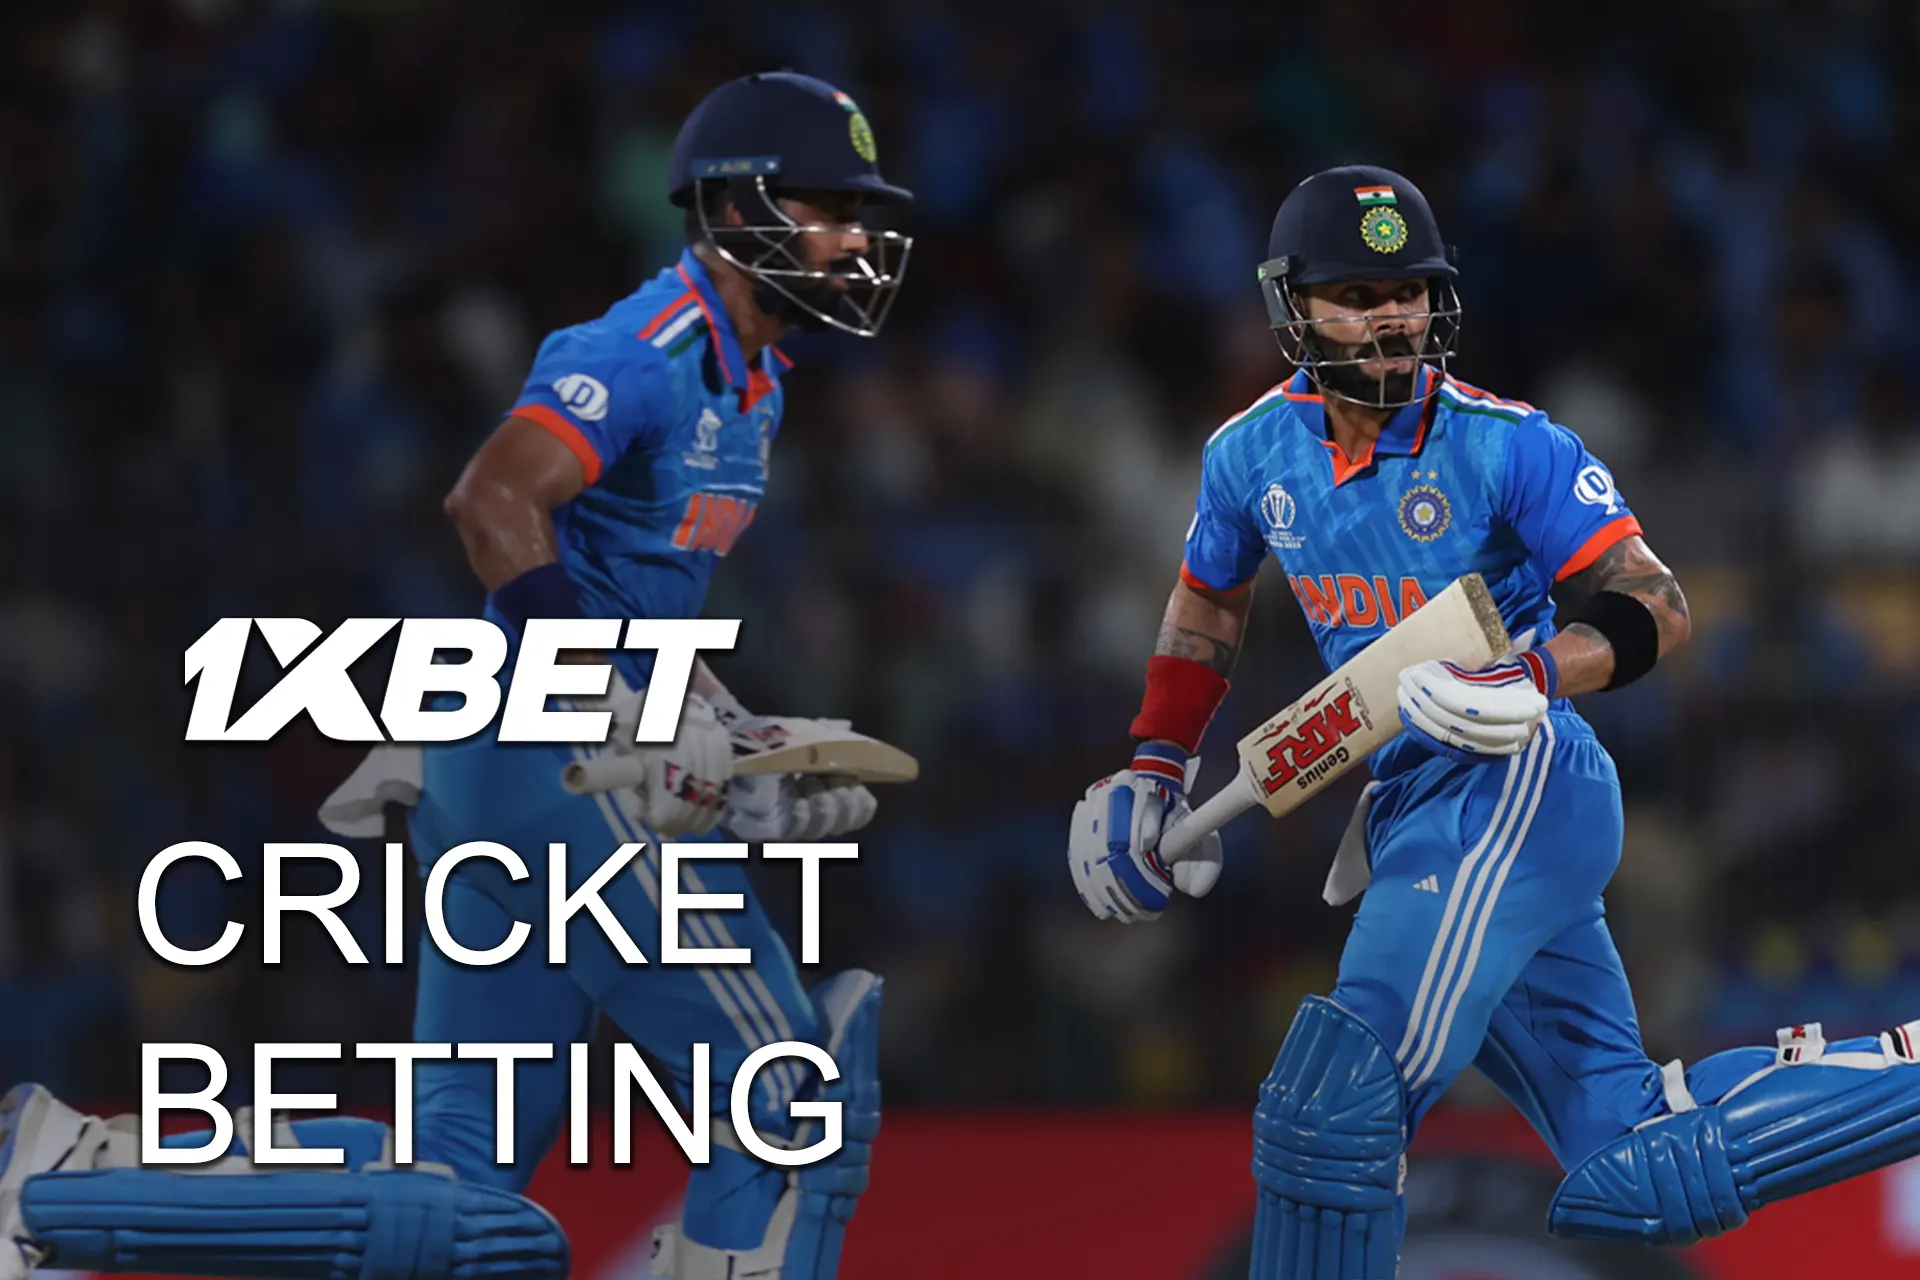 Players from India can bet on cricket on 1xBet.